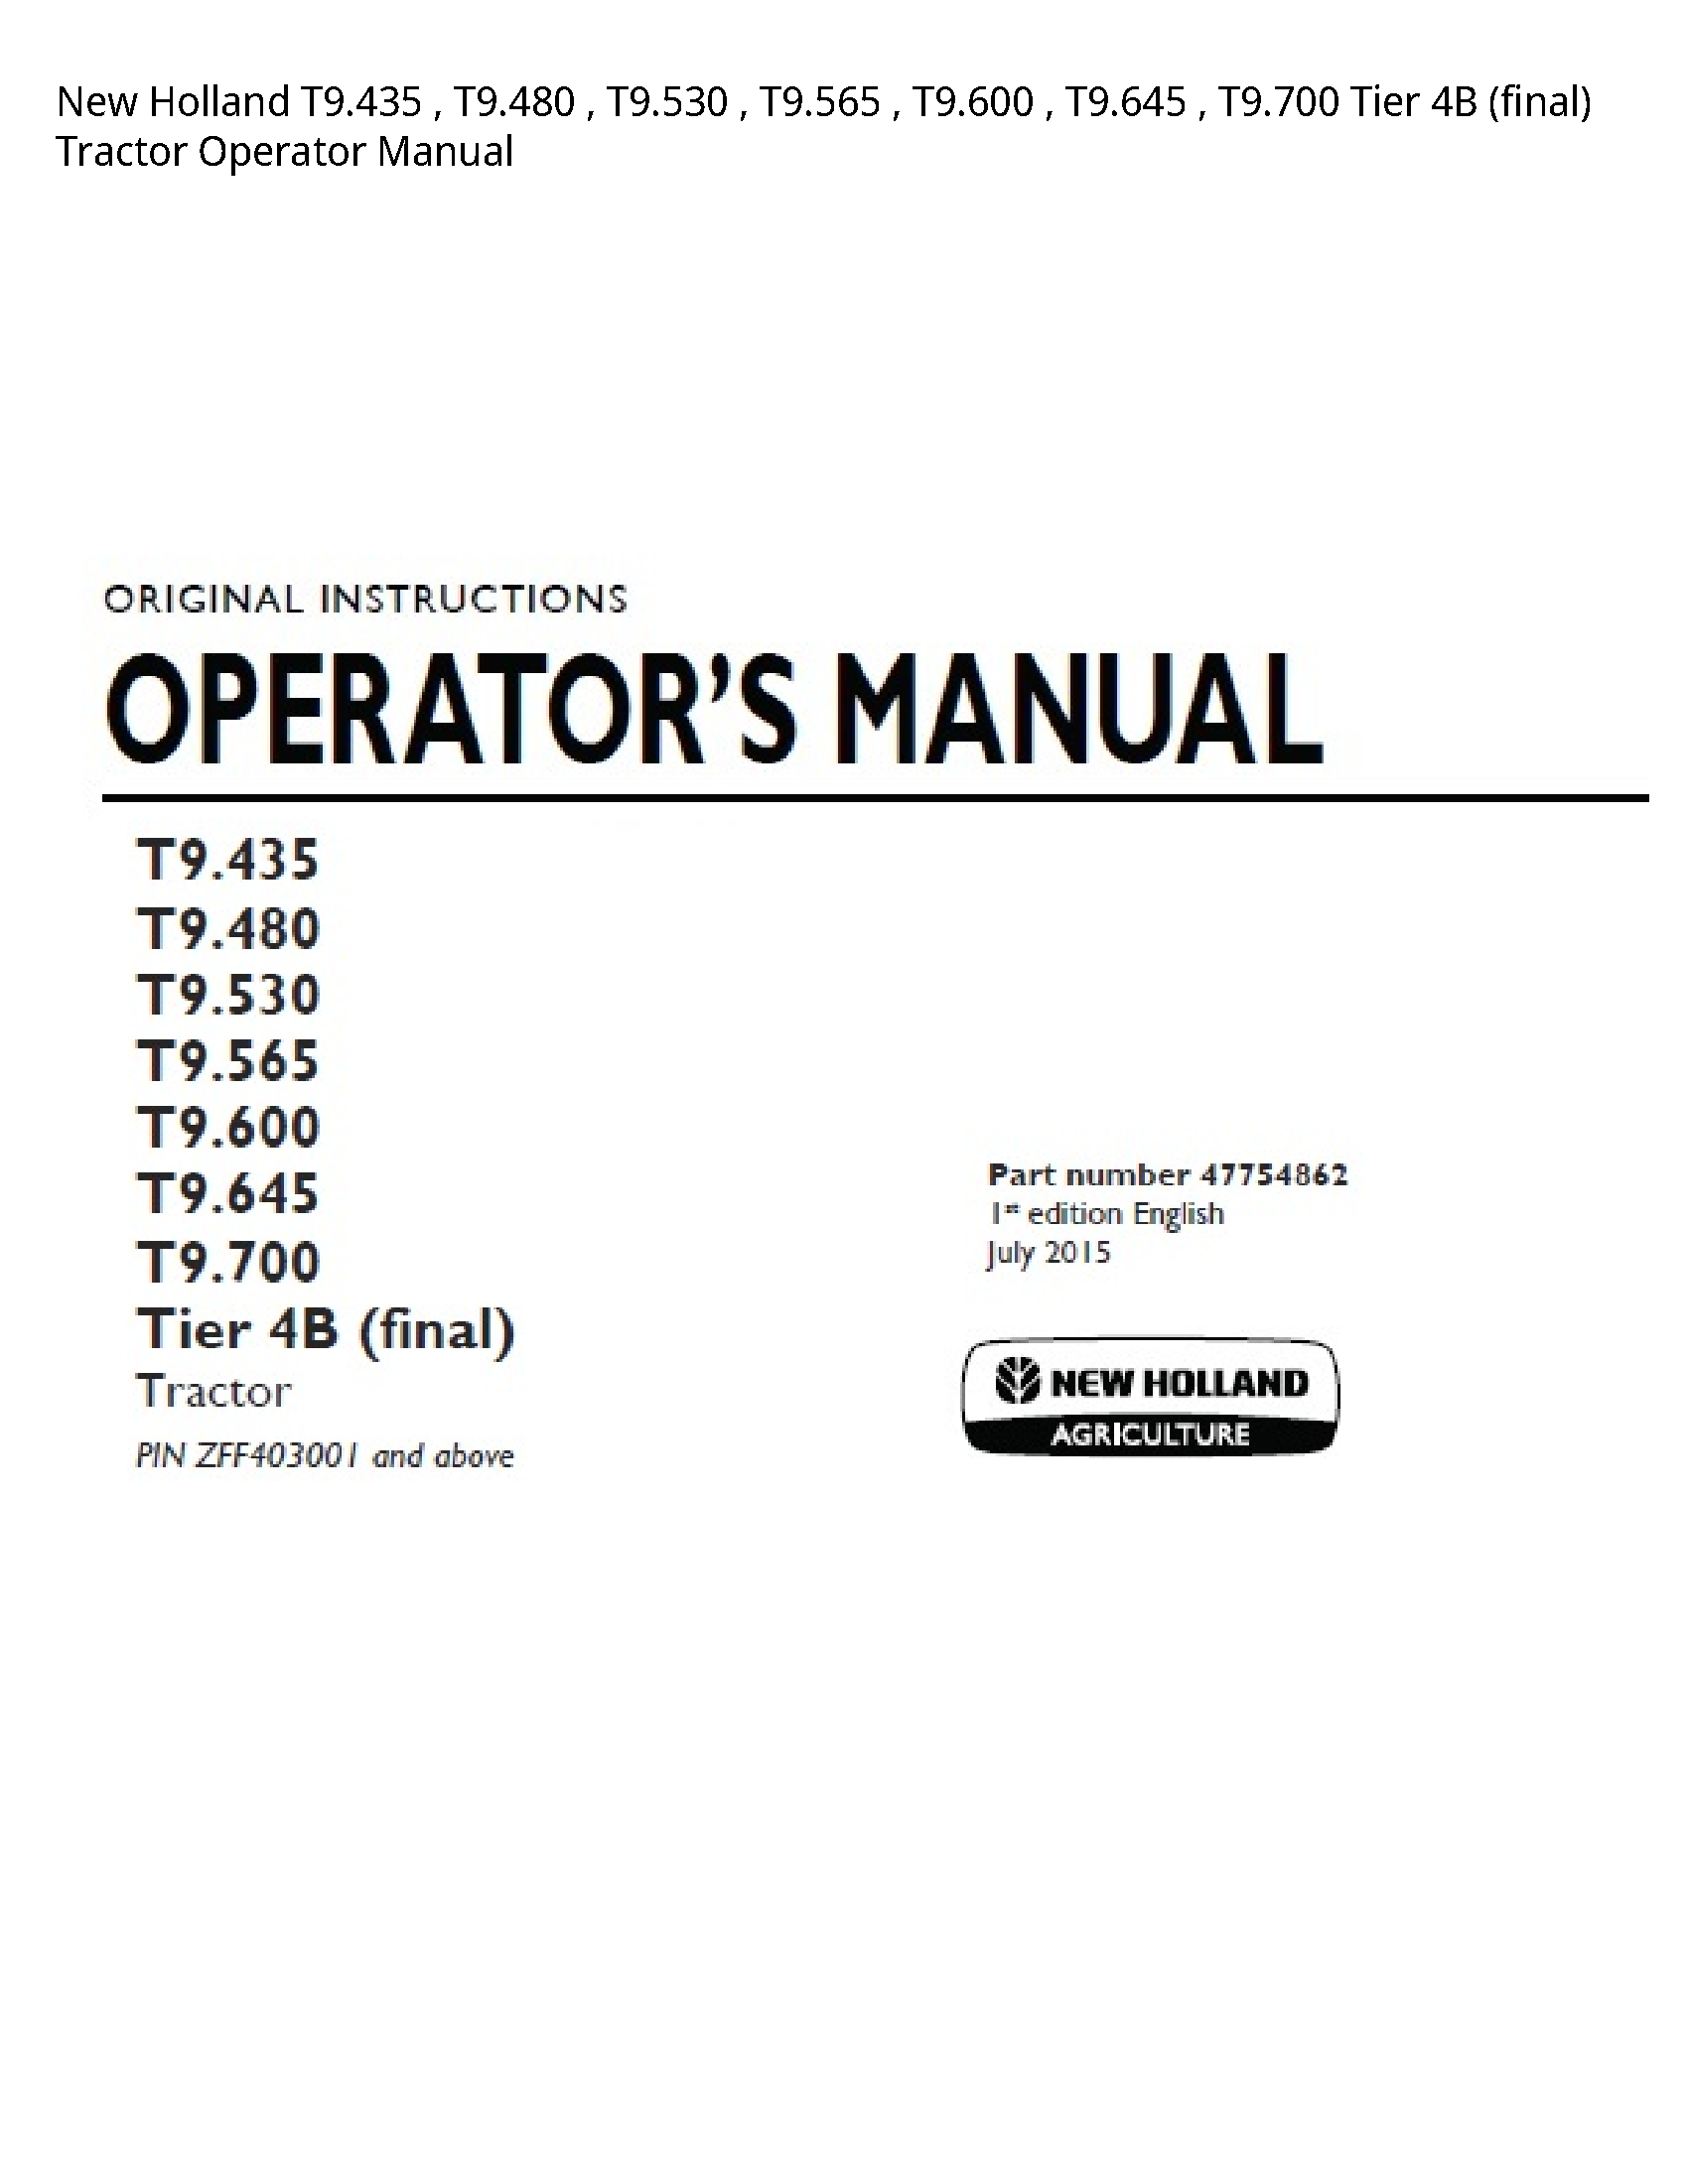 New Holland T9.435 Tier (final) Tractor Operator manual